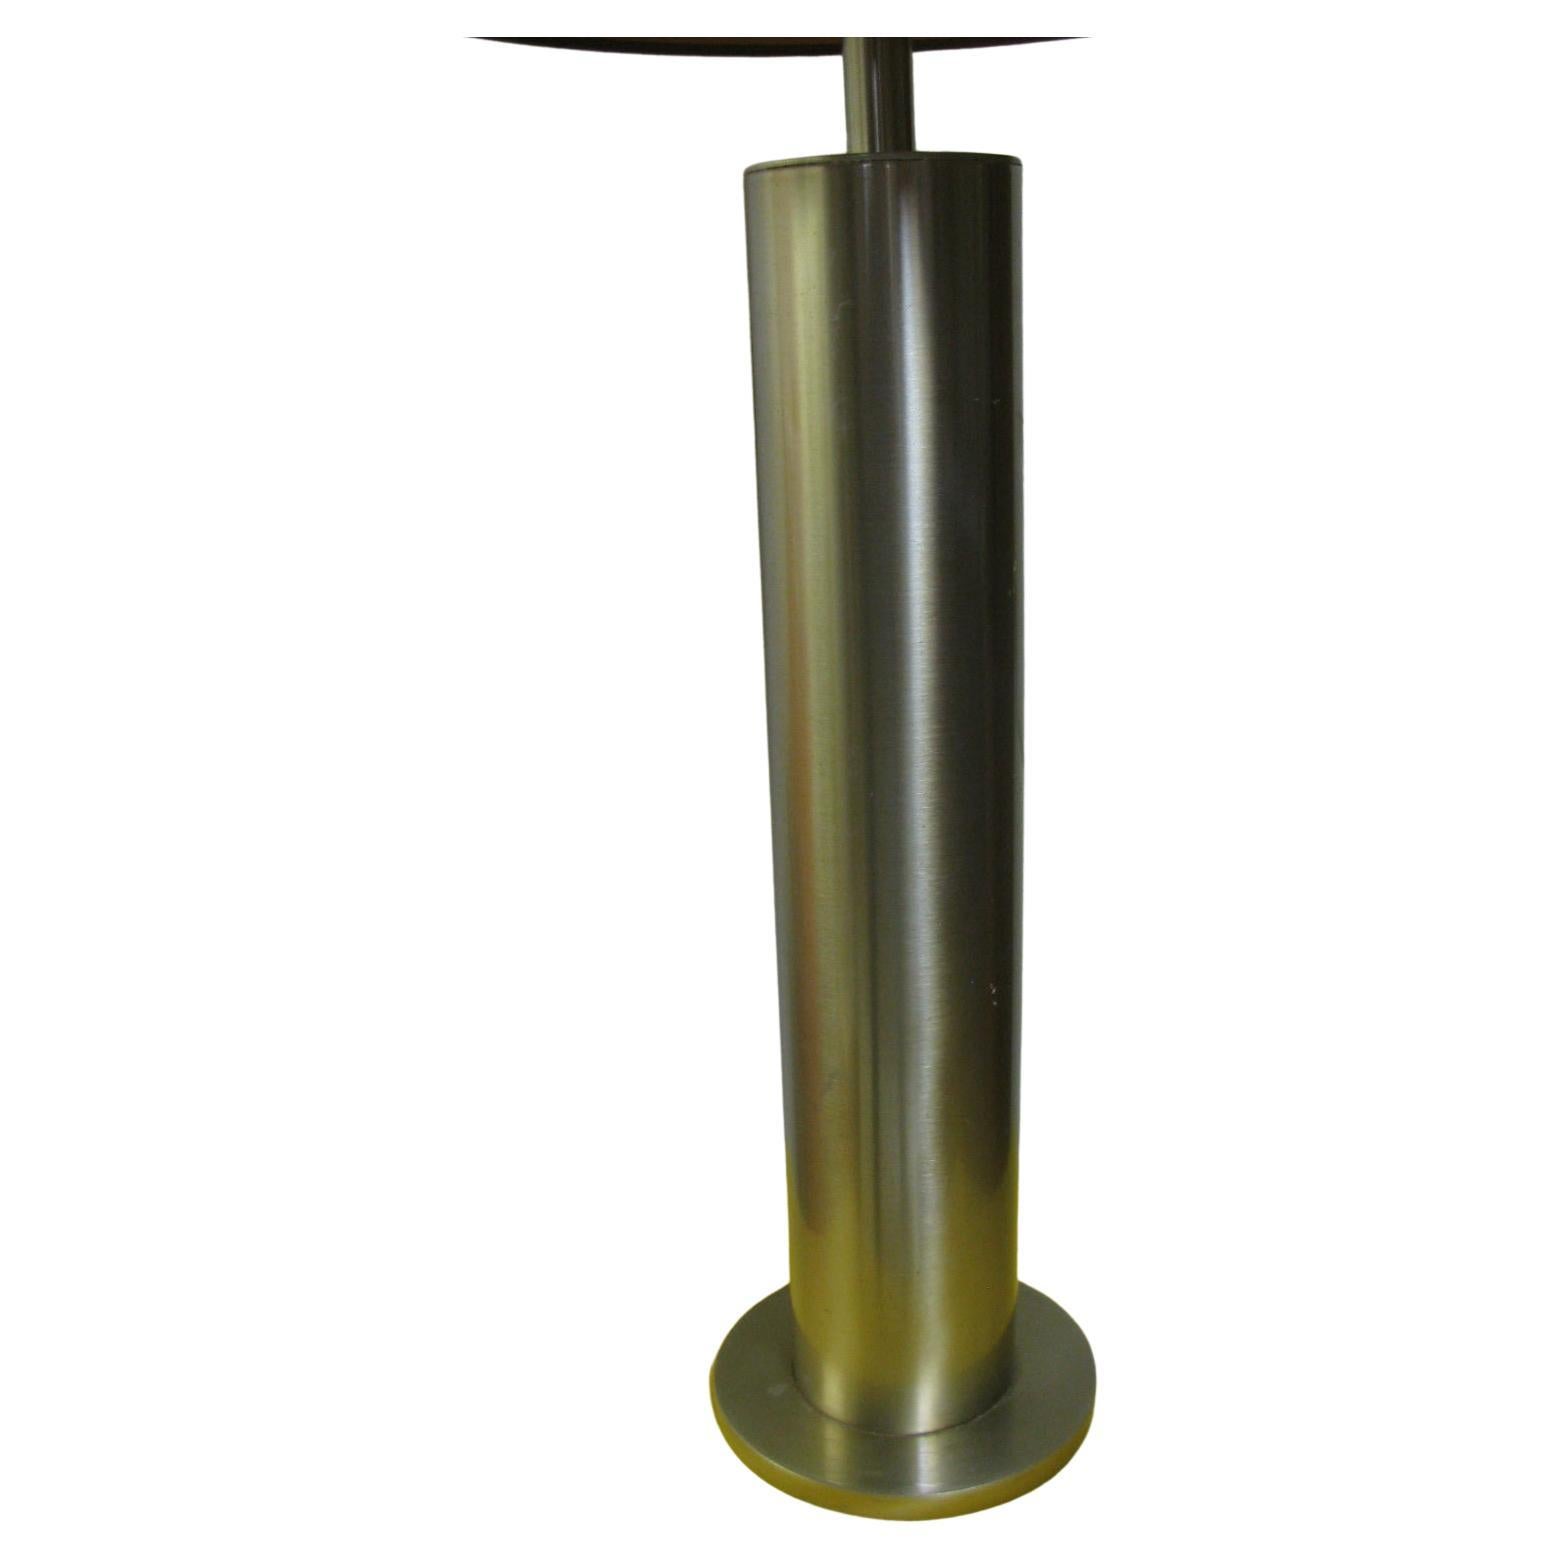 Pair of tall (28.5 inches to the top of the socket) elegant polished stainless steel lamps. Cylindrical form with no seams in the steel. These lamps would look great with black shades, which we do not have at this time. Shades not included. In